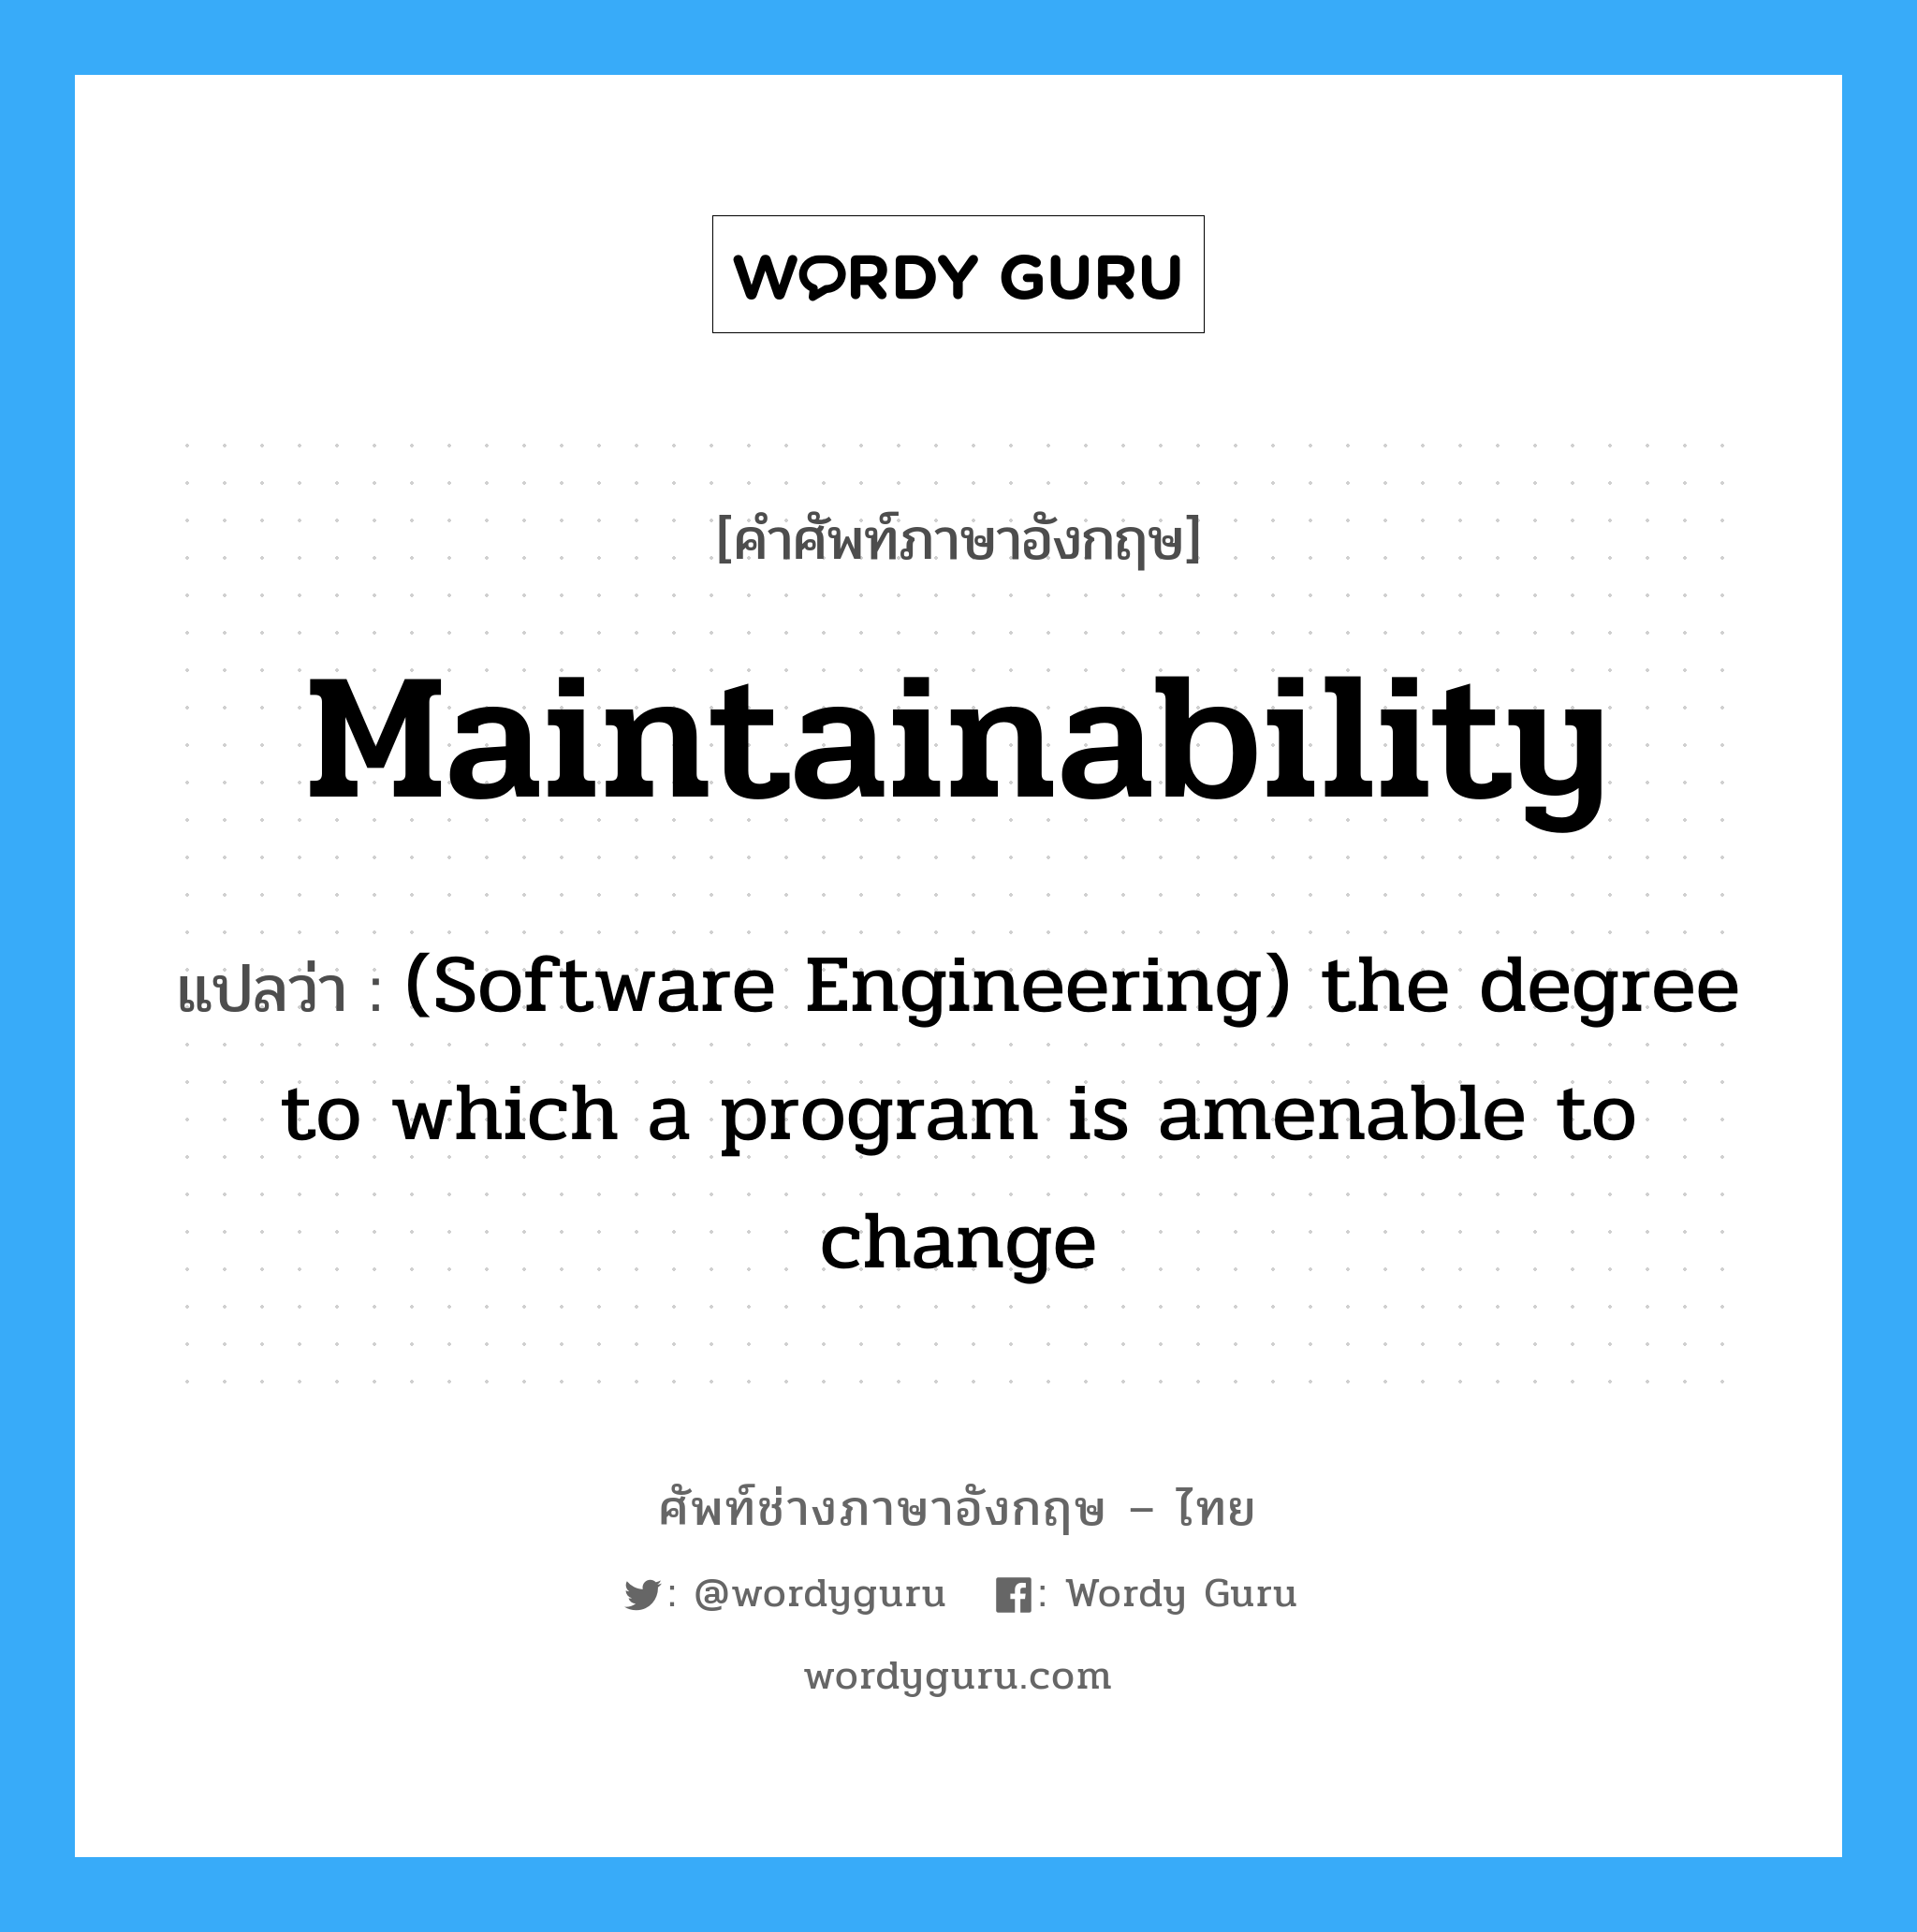 Maintainability แปลว่า?, คำศัพท์ช่างภาษาอังกฤษ - ไทย Maintainability คำศัพท์ภาษาอังกฤษ Maintainability แปลว่า (Software Engineering) the degree to which a program is amenable to change